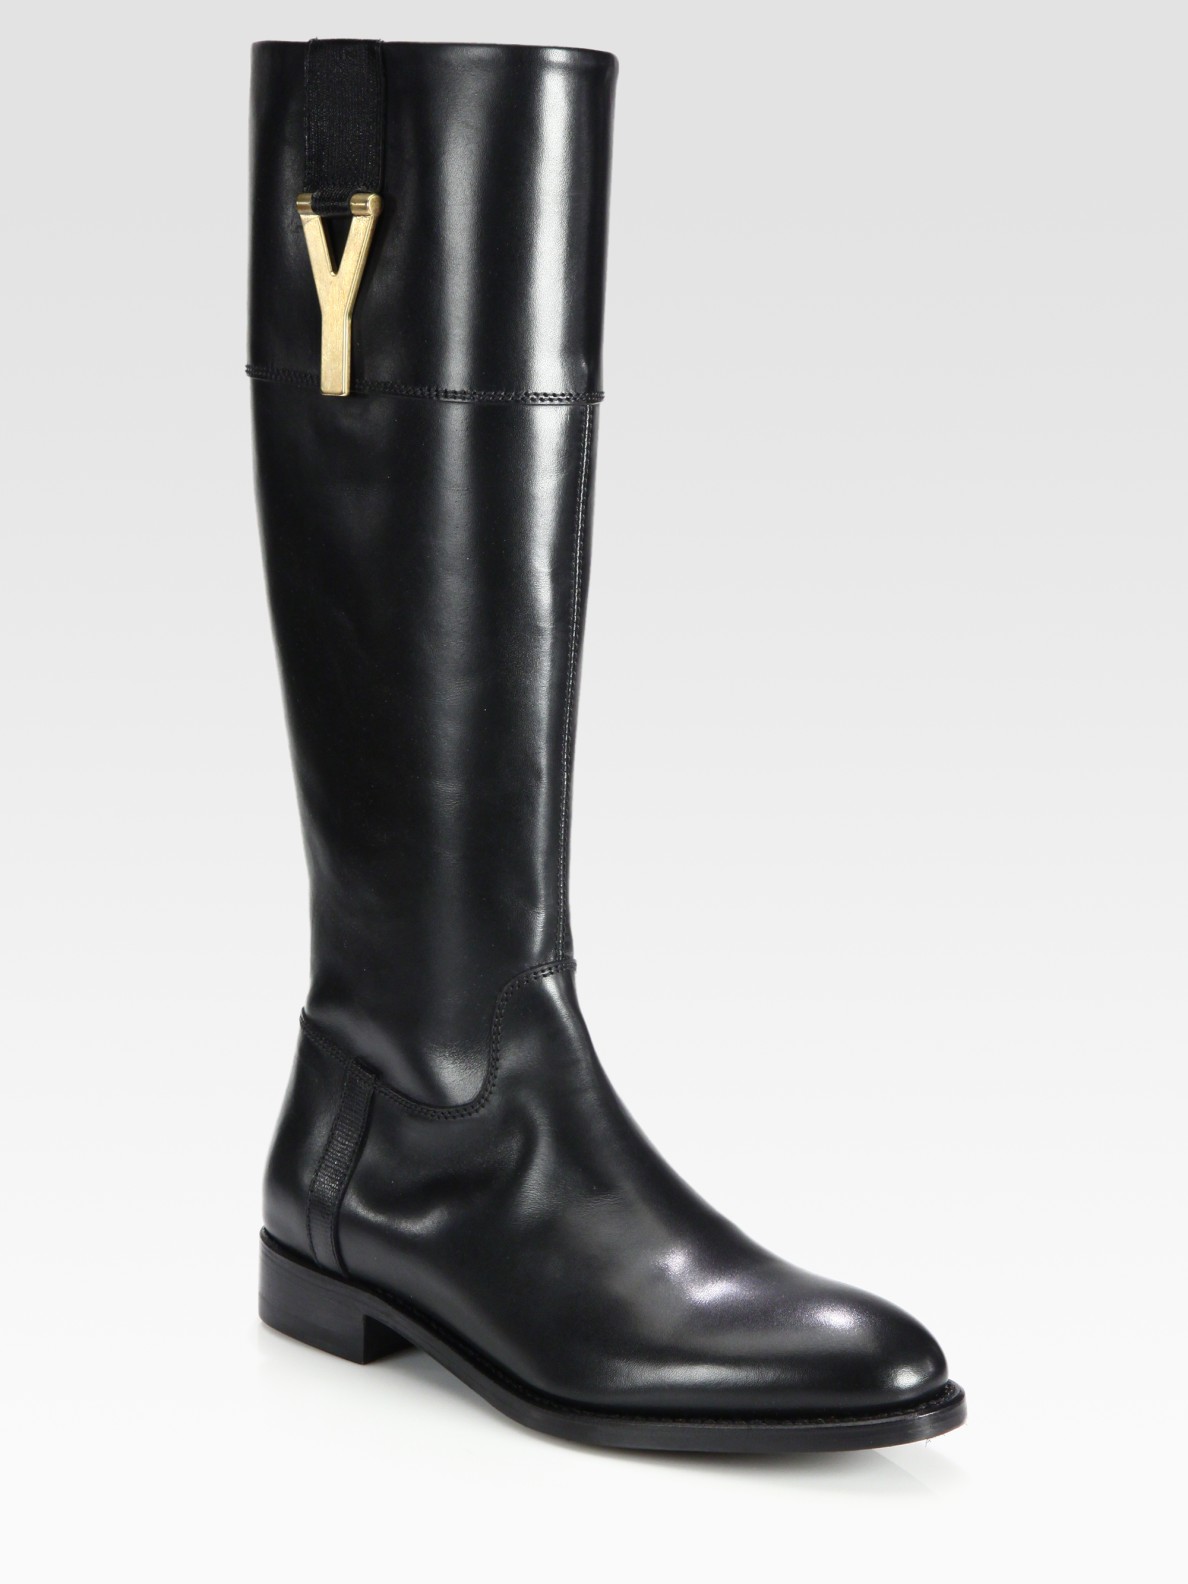 Saint laurent Ysl Chyc Leather Kneehigh Boots in Black | Lyst  